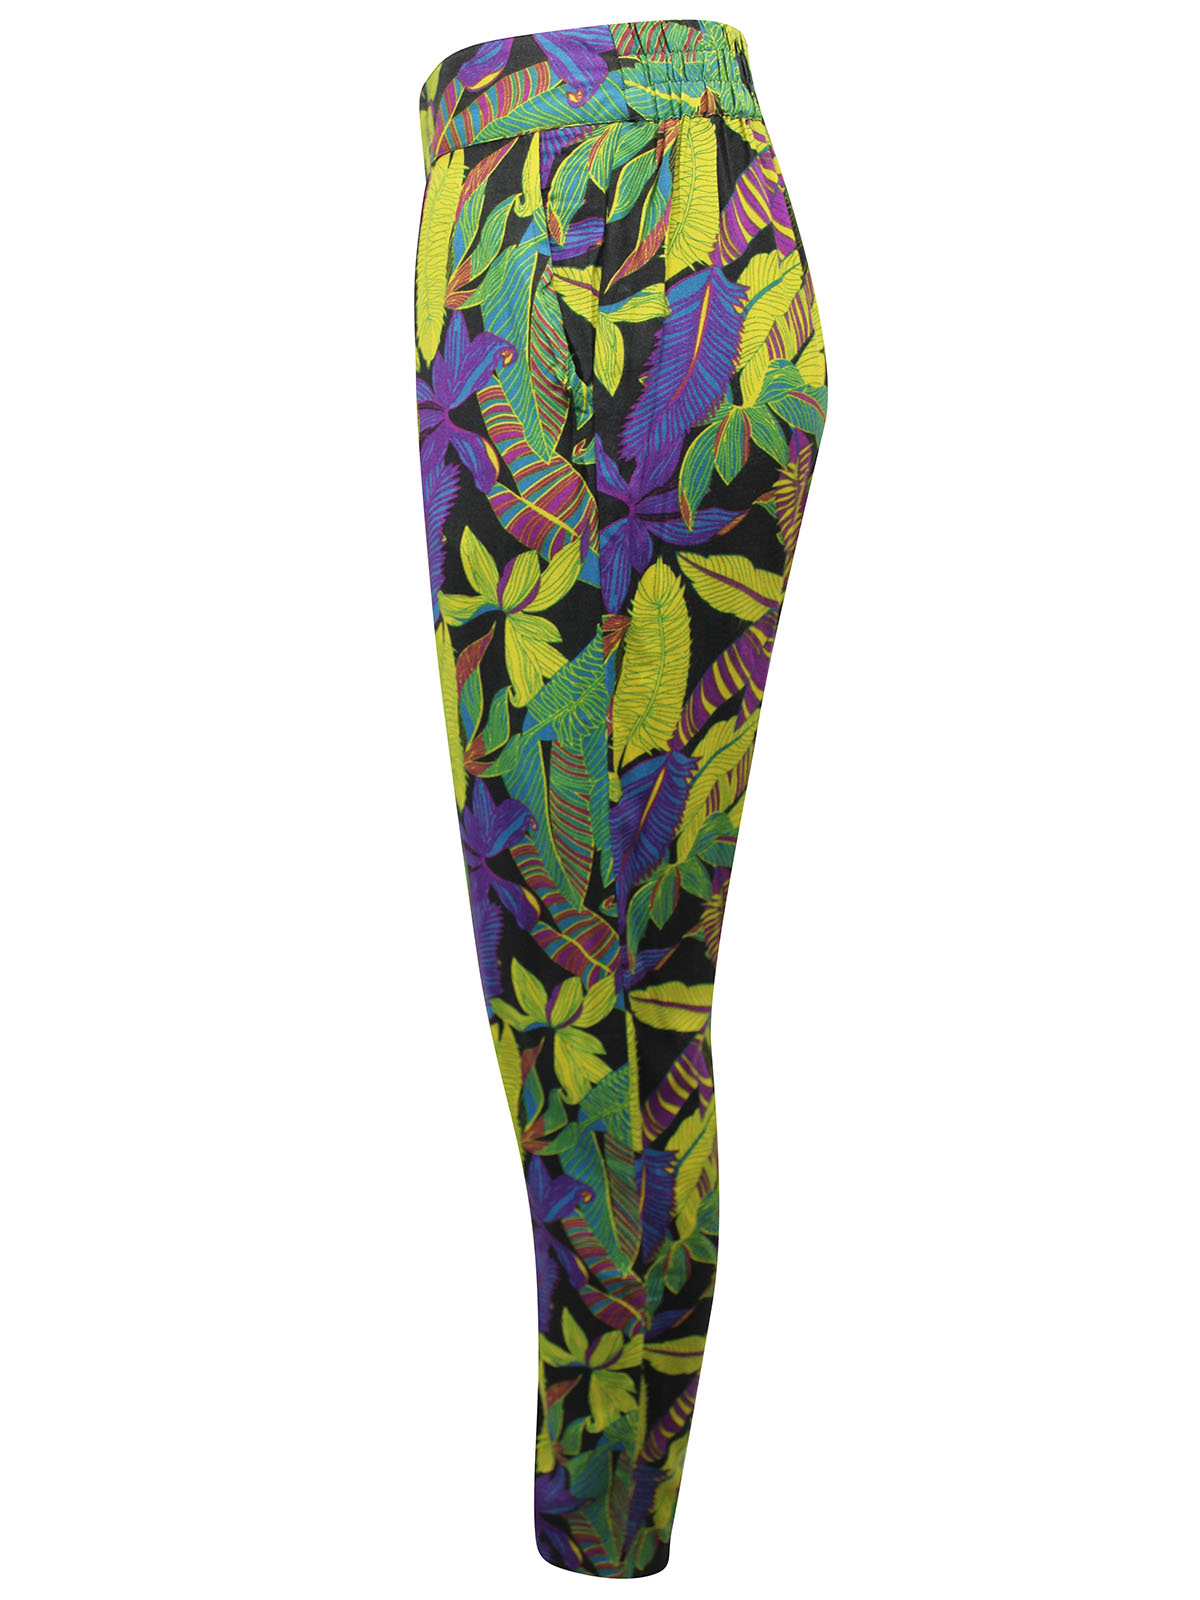 MOSSIMO leggings petite small abstract lines colorful